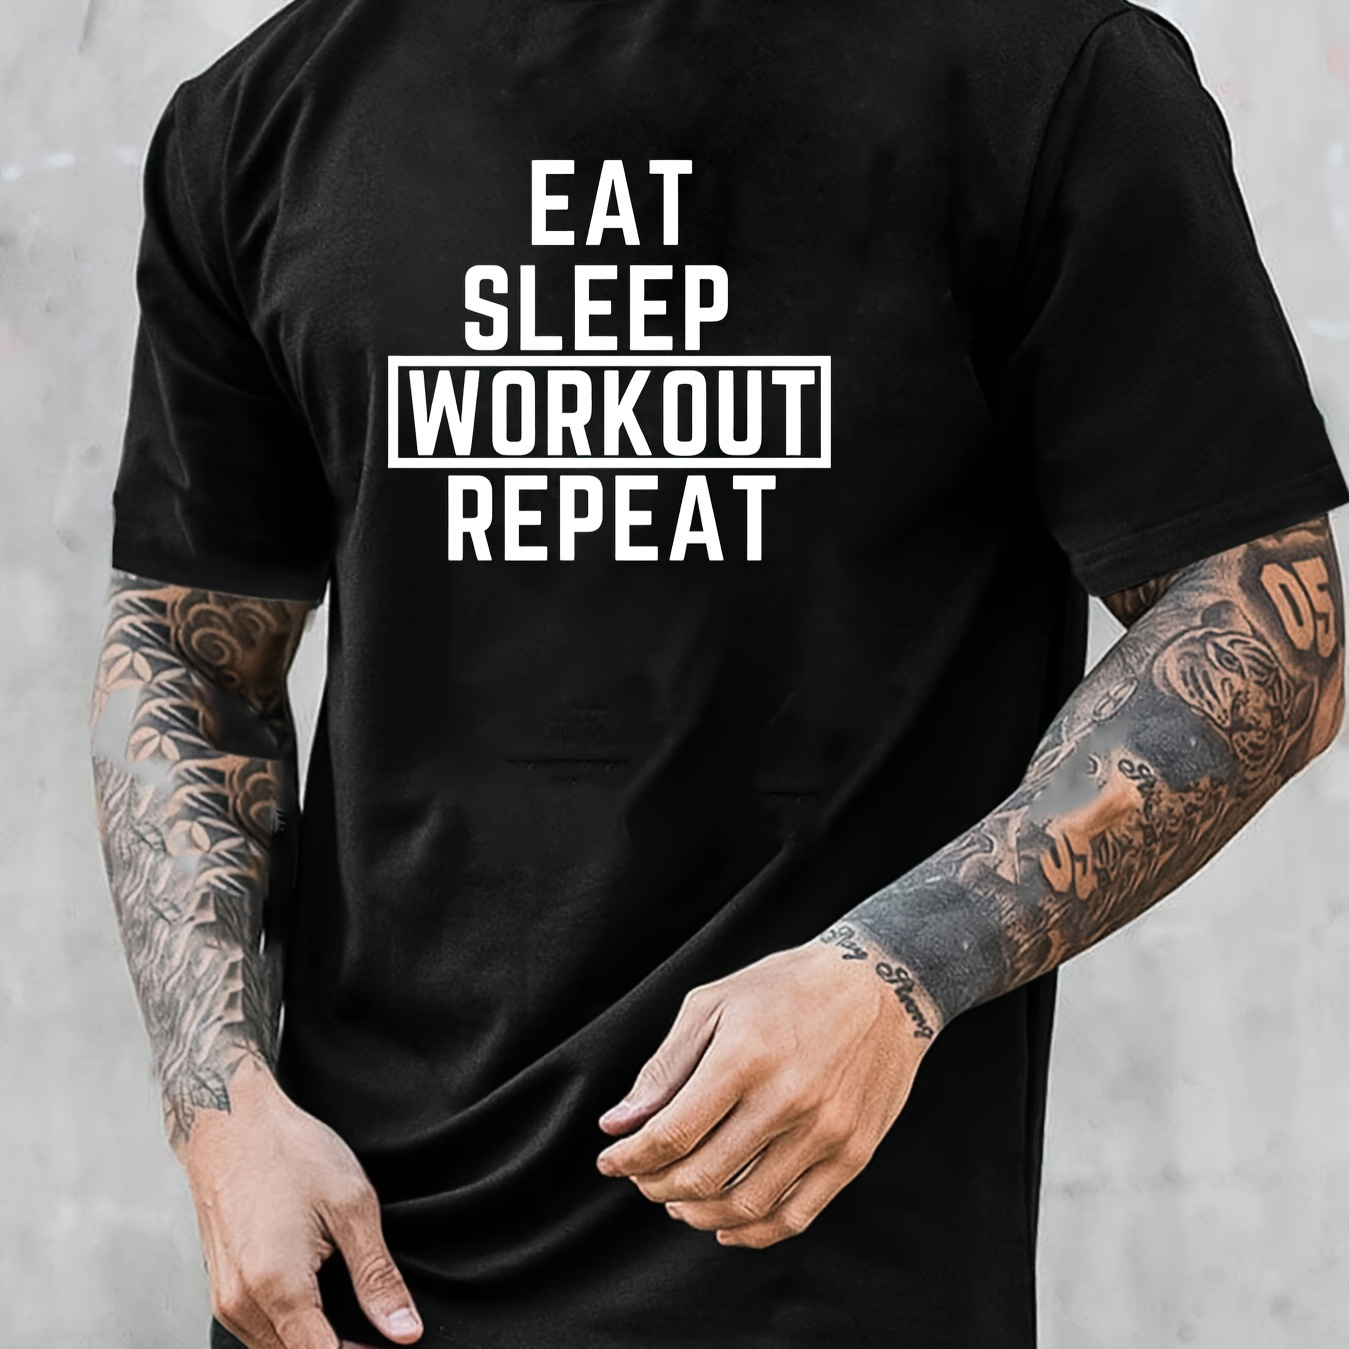 

Eat-sleep-workout Repeat Print Men's Short Sleeve T-shirts, Comfy Casual Breathable Tops For Men's Fitness Training, Jogging, Men's Clothing